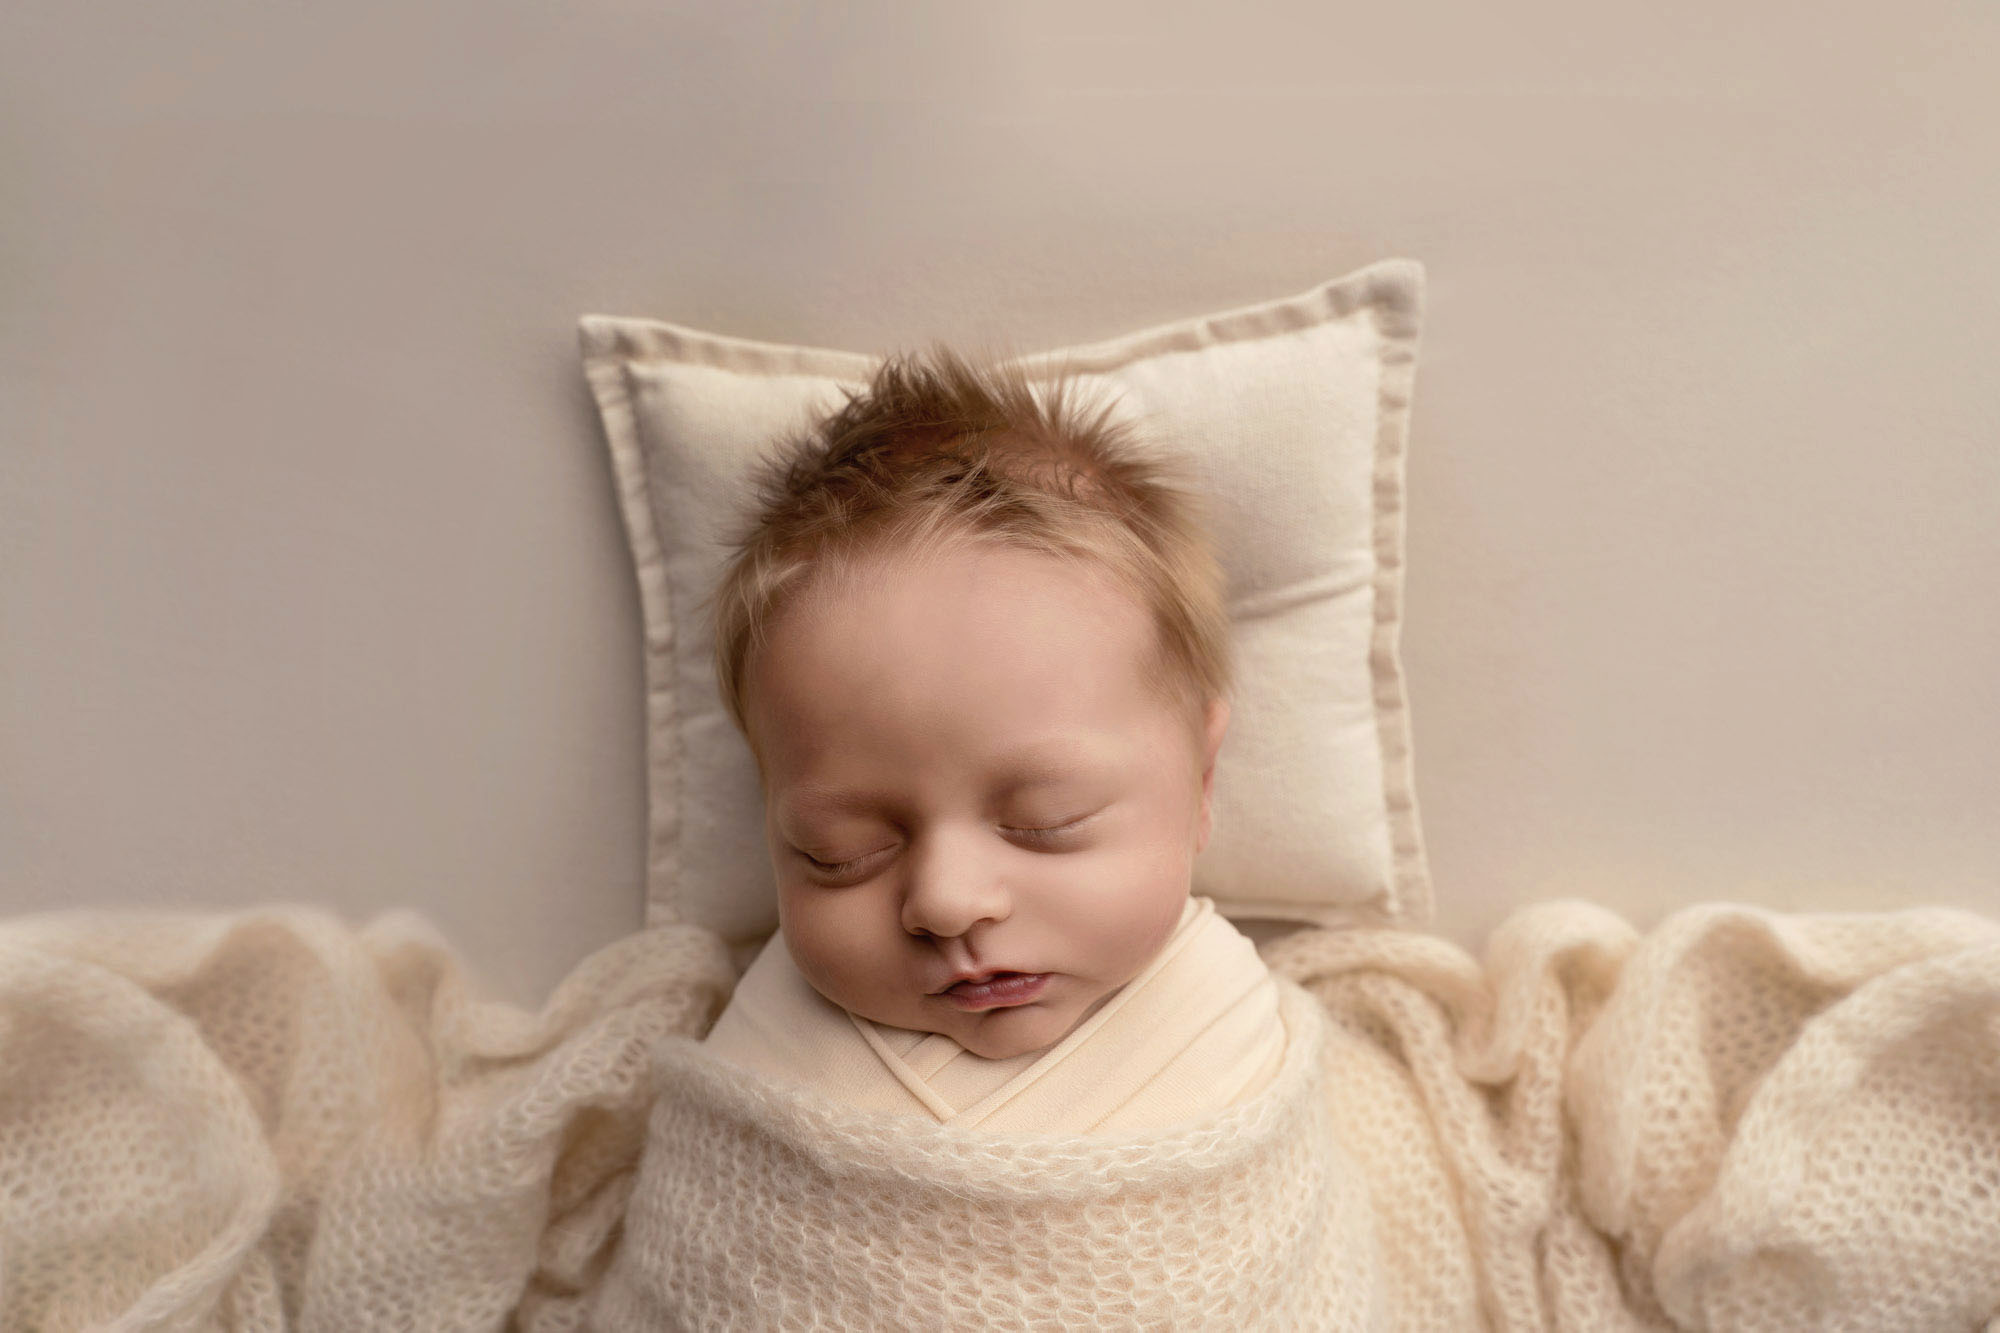 Newborn photography Edinburgh - colour photograph of newborn boy wrapped in a swaddle with a small pillow underneath his head taken by Edinburgh newborn photographer Beautiful Bairns Photography